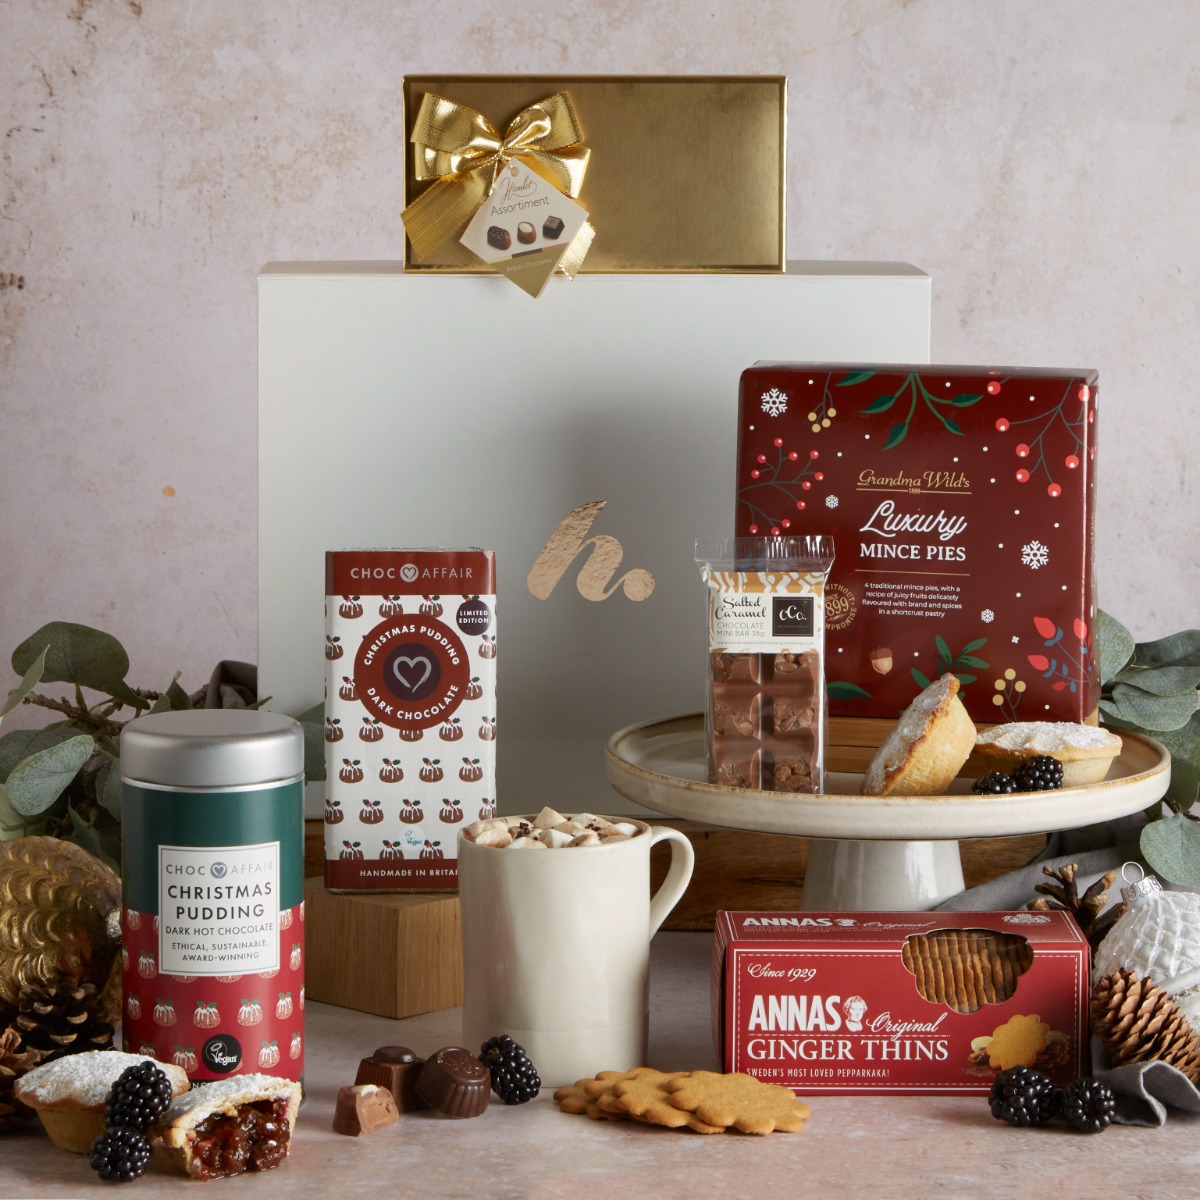 The Festive Hot Chocolate hamper with contents on display